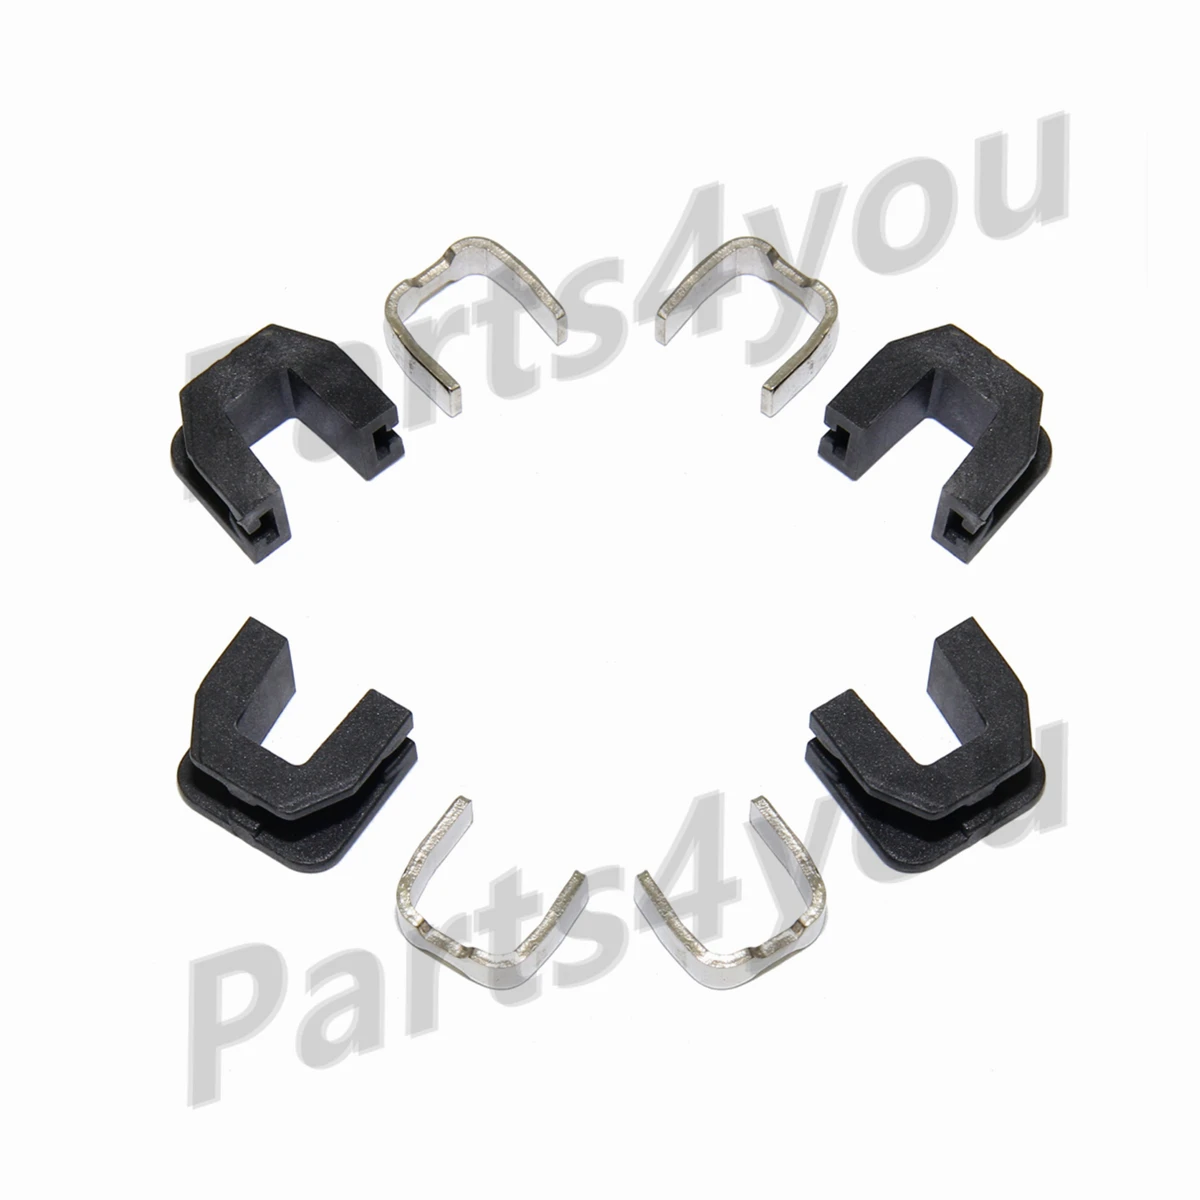 v slot builds x axis slider aluminum plate with timing belt buckle buckle 2020 profile board 3d printer part 4PCS Slider with Spacer Kit for Linhai 260 300 E2 400 E2 400 2B IRS LH260 LH300 LH400 Majester 250 YP250 23807 23811